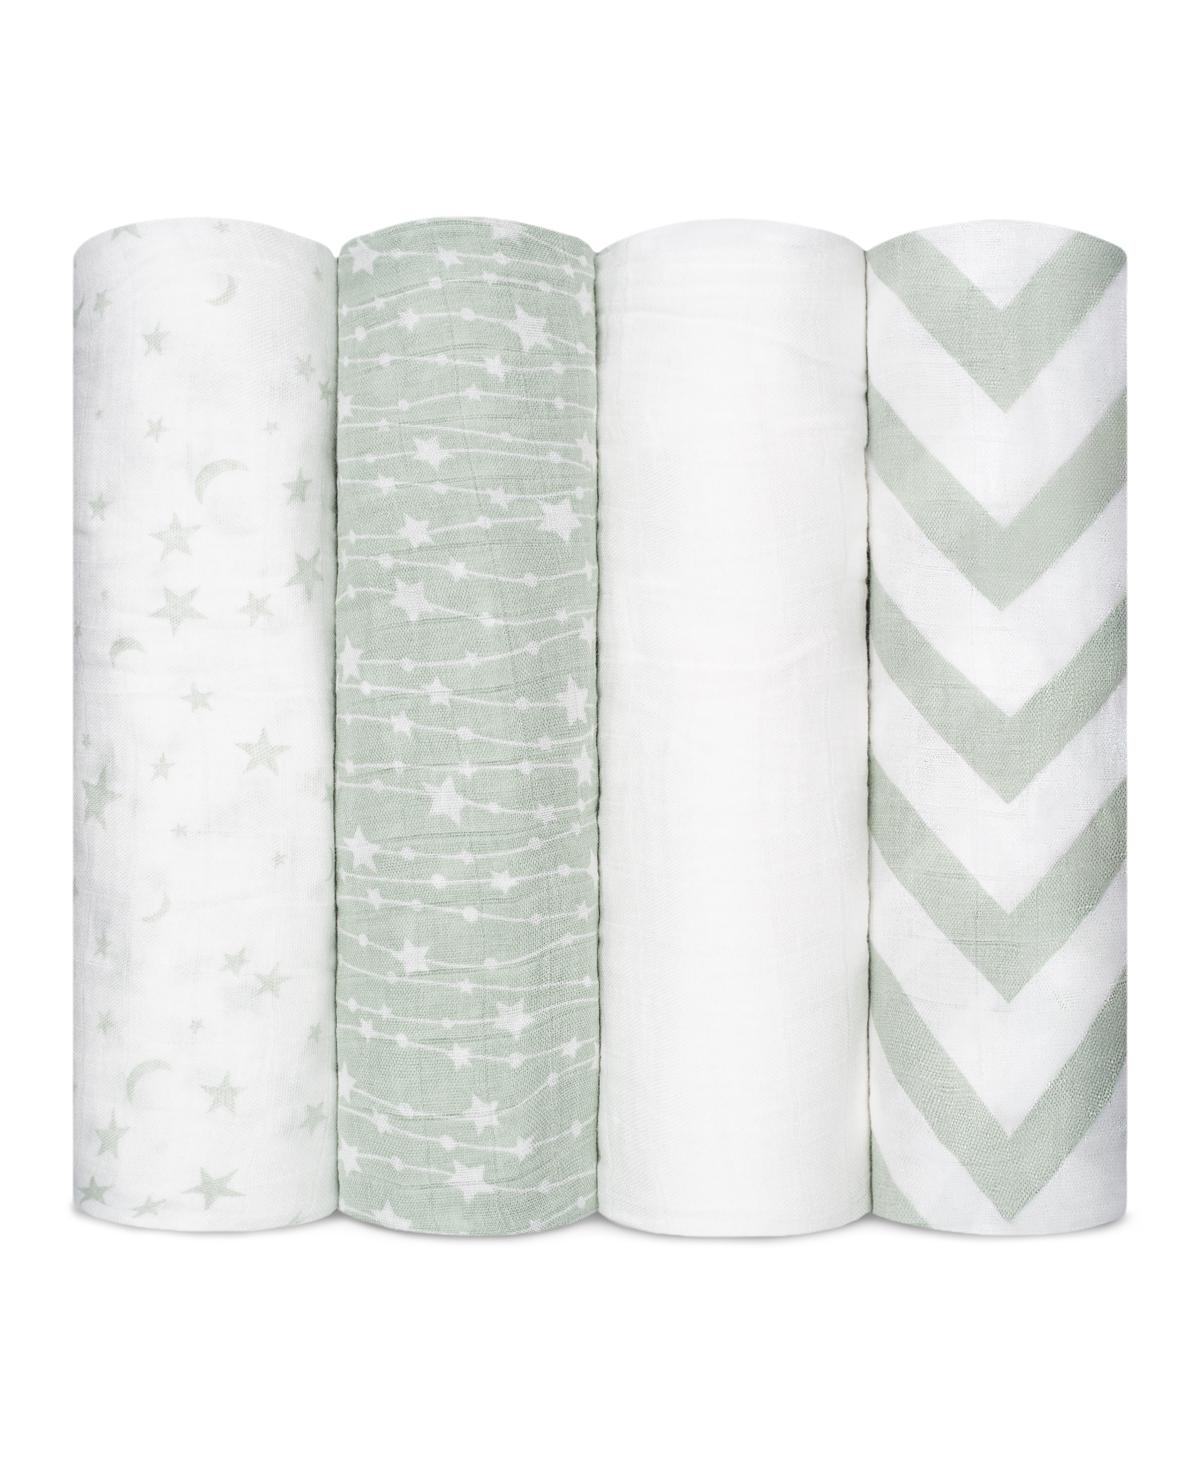 Comfy Cubs Baby Boys And Baby Girls Muslin Swaddle Blanket, Pack Of 4 In Green